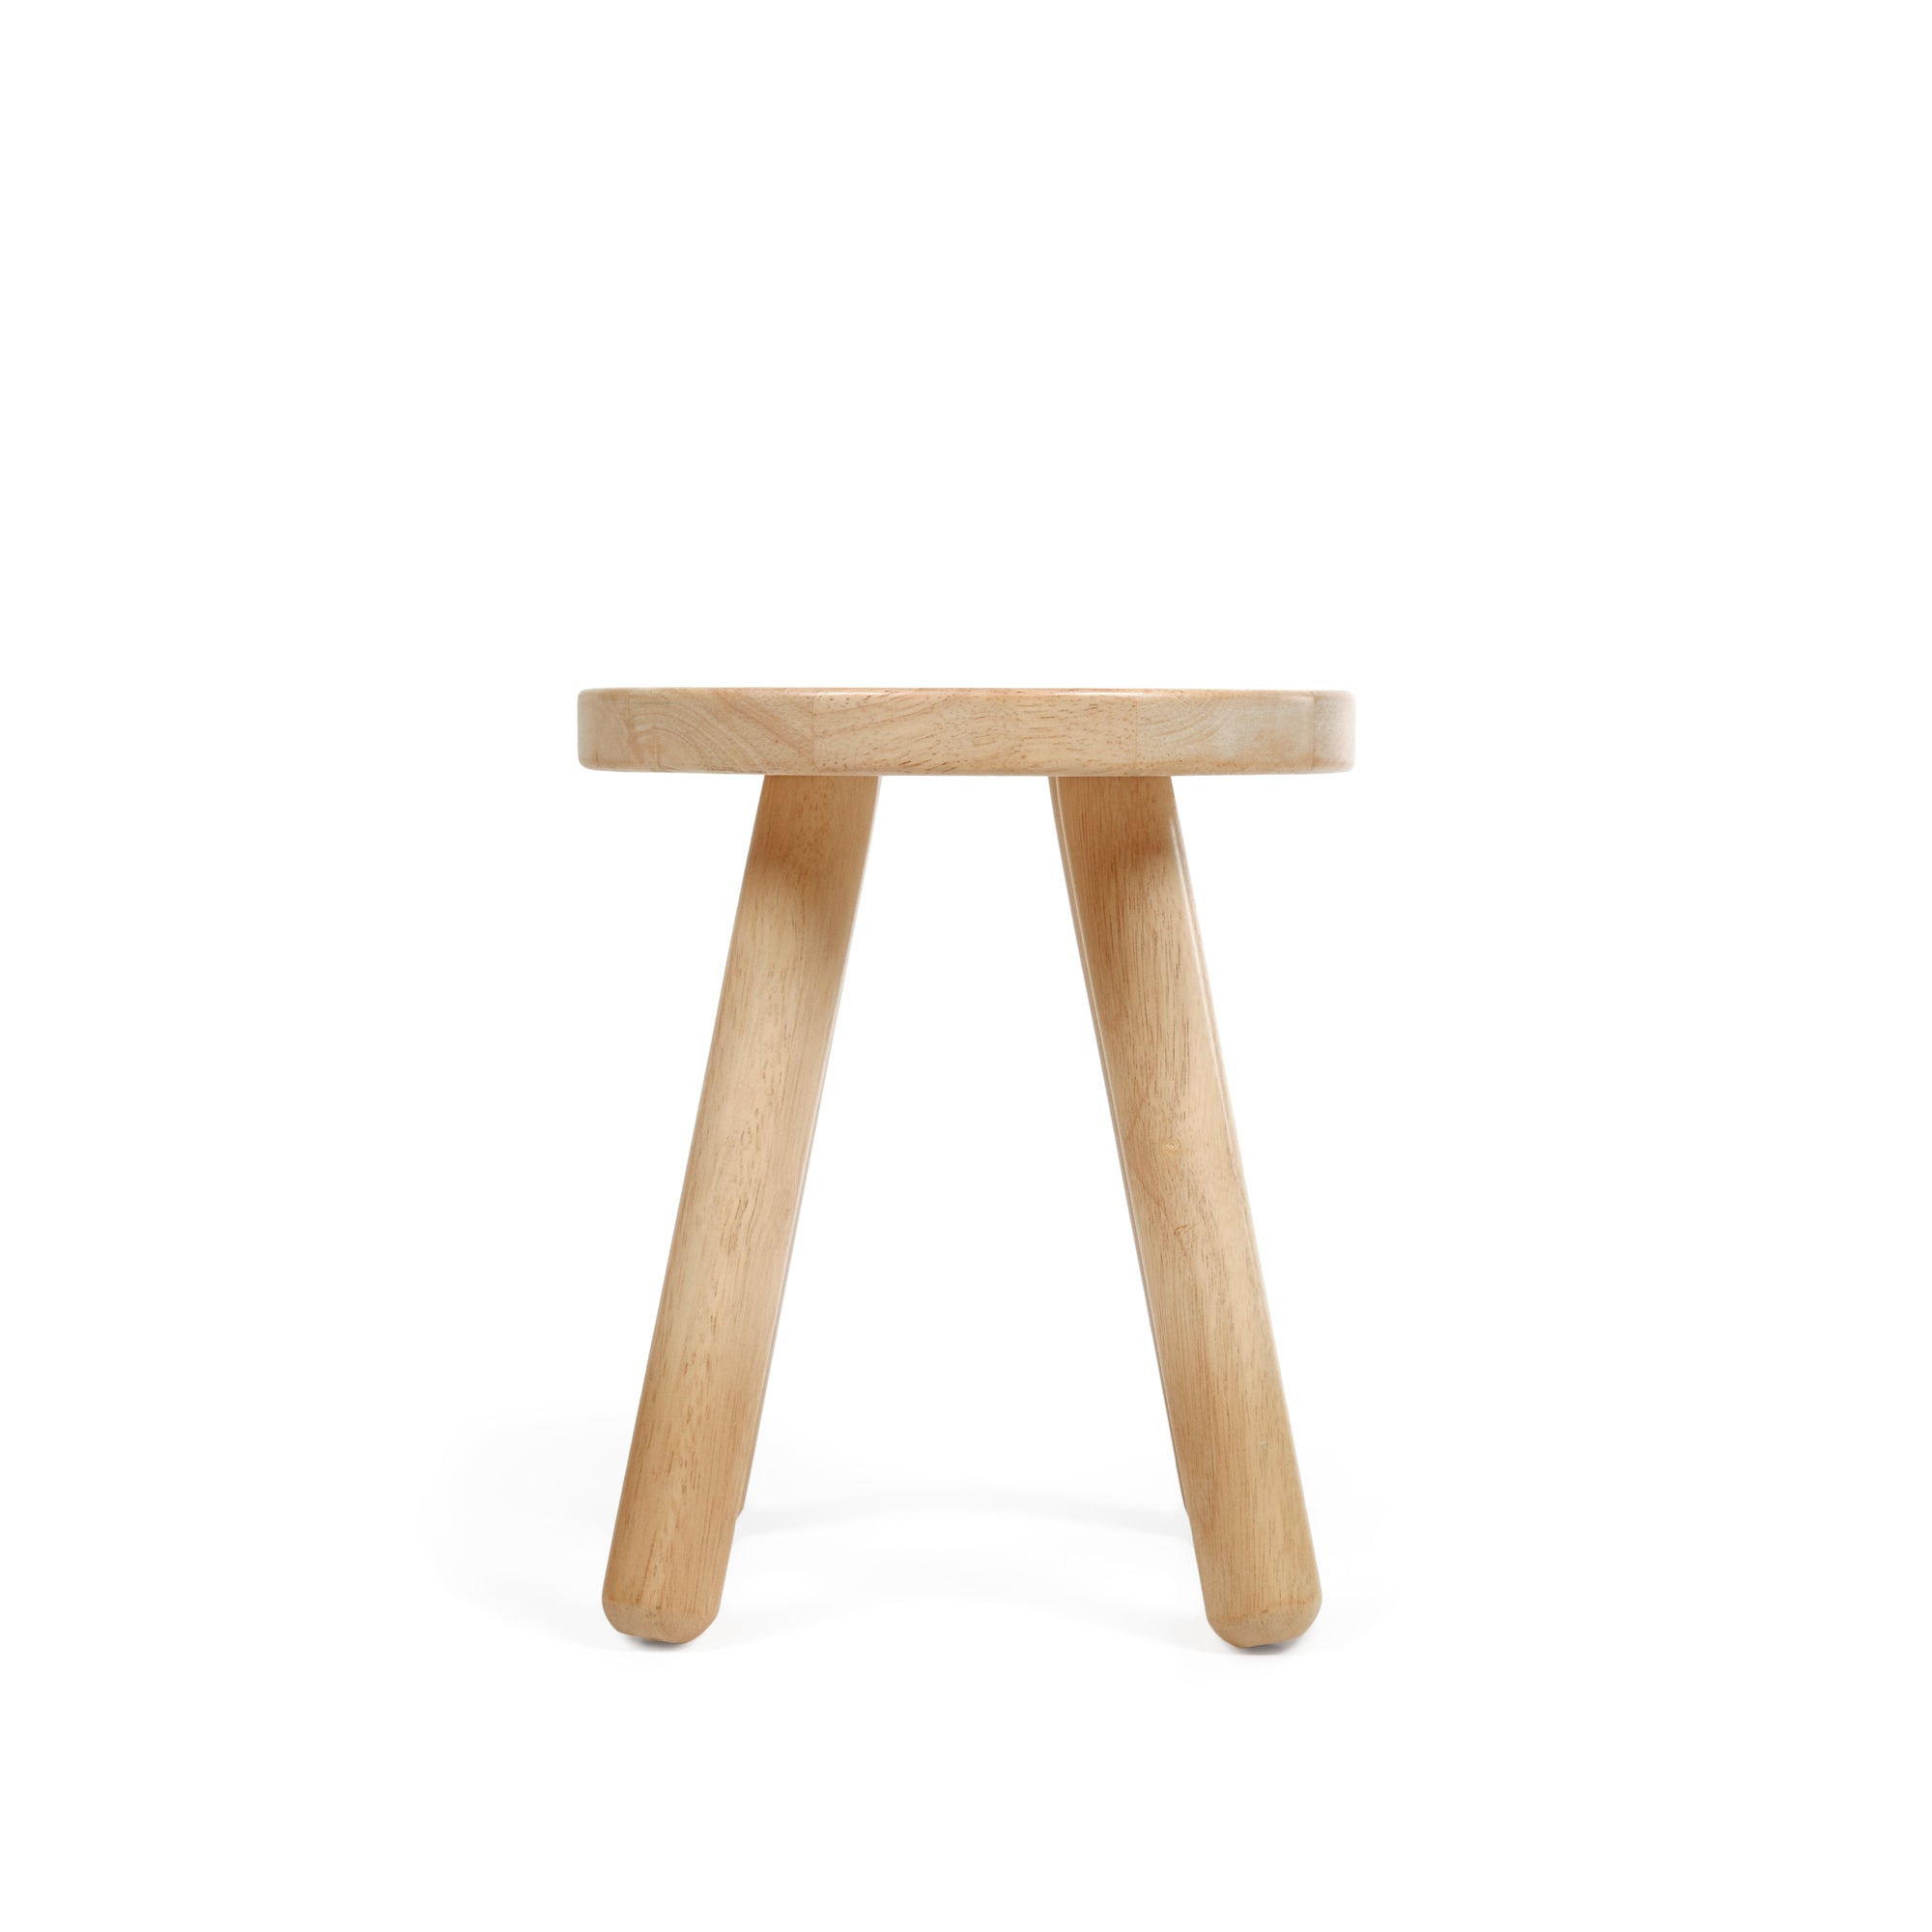 Dilcia kids stool in solid rubber wood 31 cm high